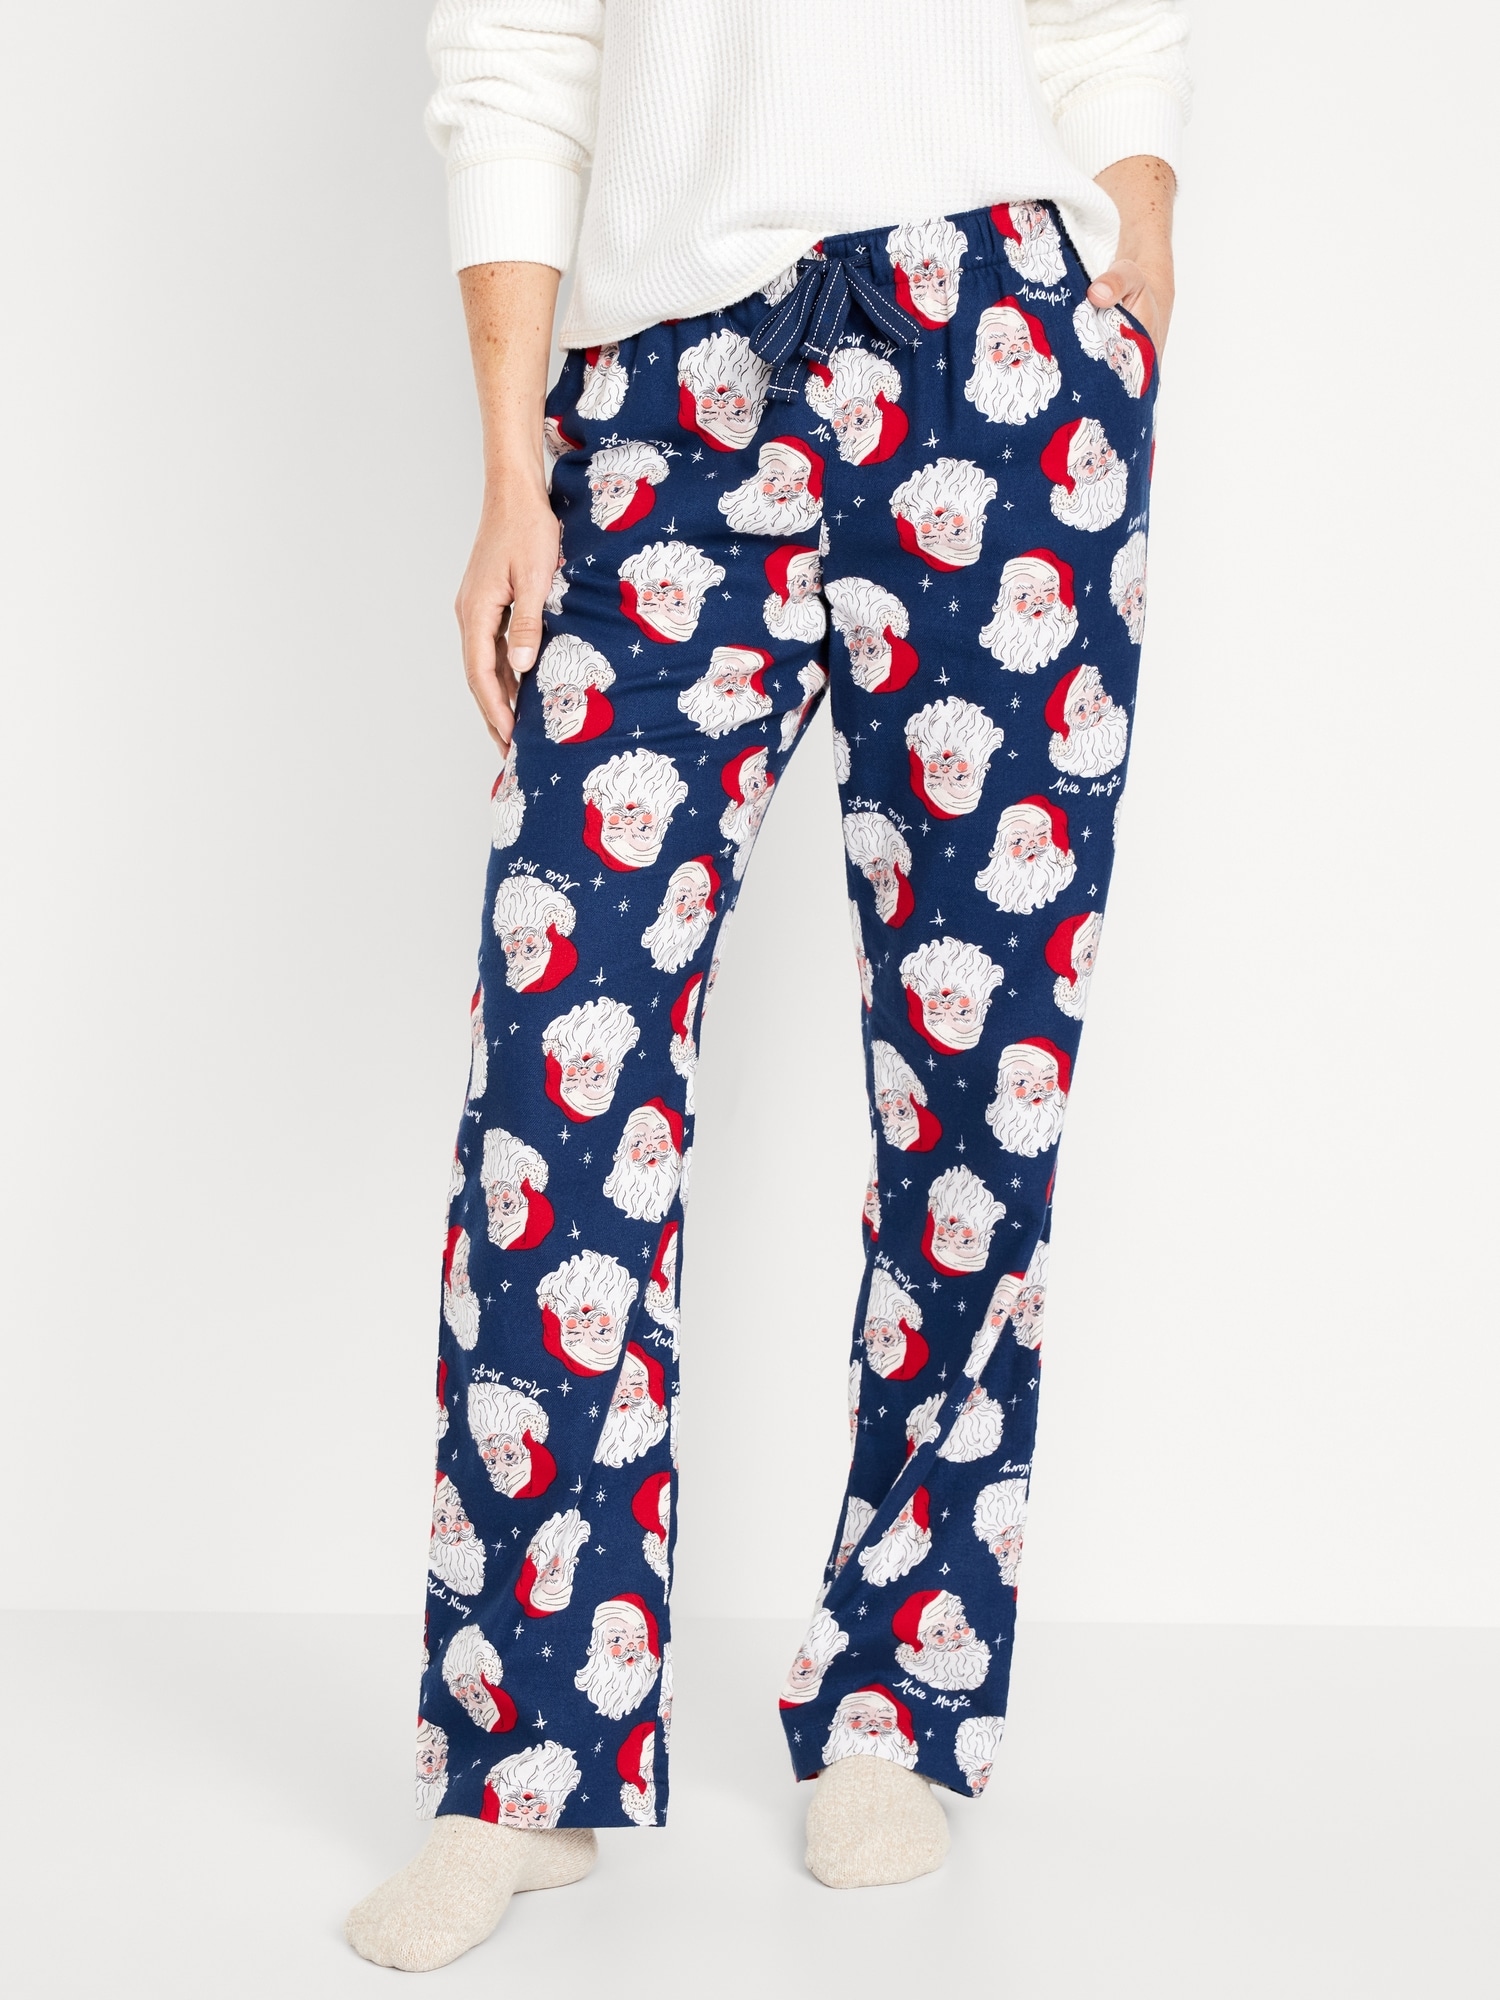 Old Navy Pajama Pants Only $5 (Regular up to $24.99) - Today Only!